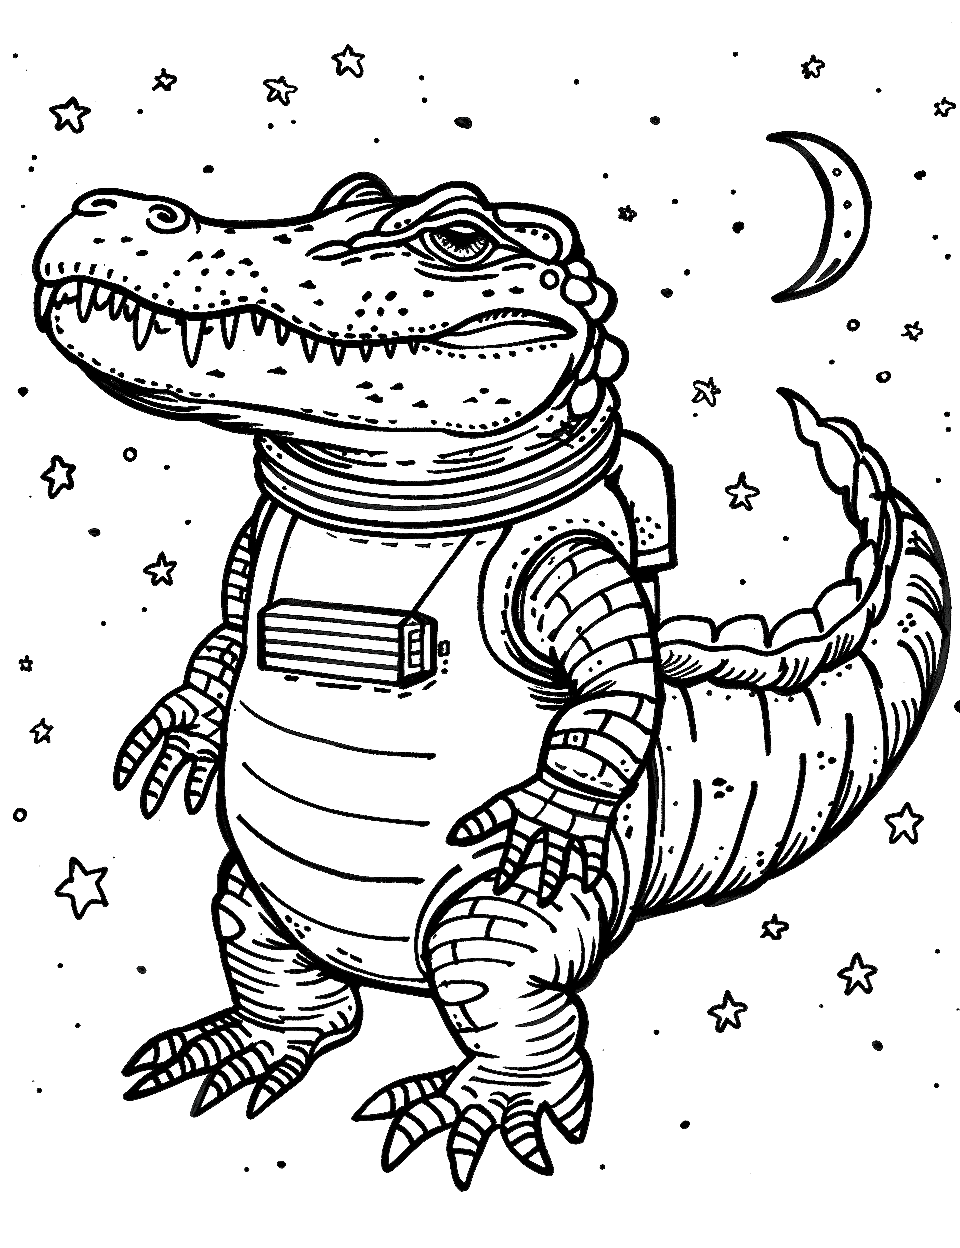 Alligator in a Spacesuit Coloring Page - An alligator floating in space, wearing a spacesuit with stars in the background.